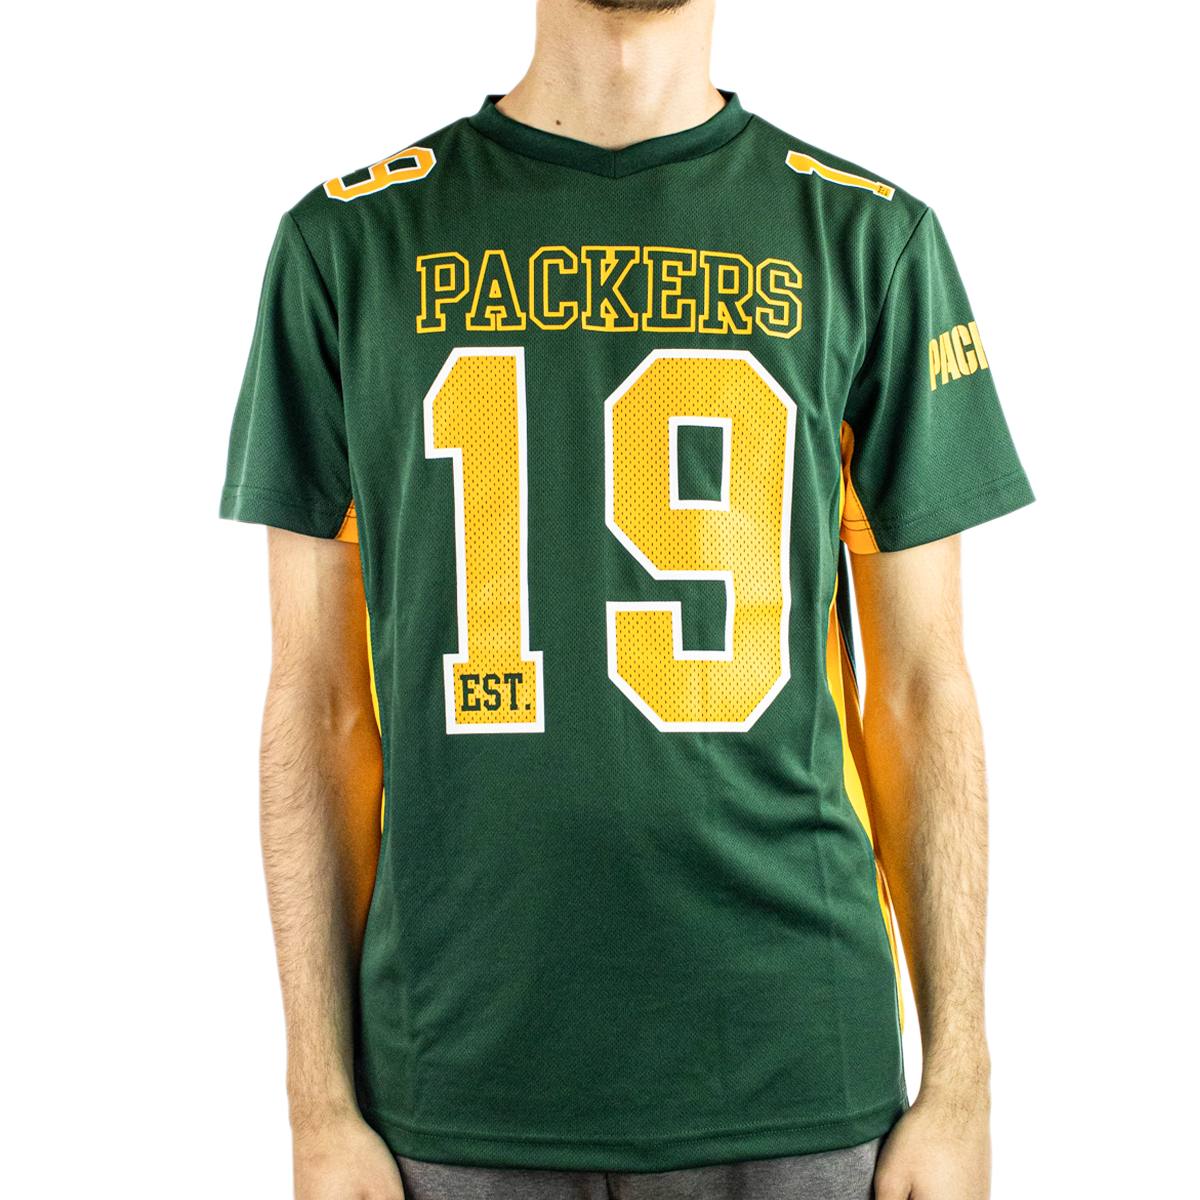 Fanatics Green Bay Packers Value Franchise Poly Mesh Supporters Jersey Trikot 3401M-DGN-GBP-FPM-